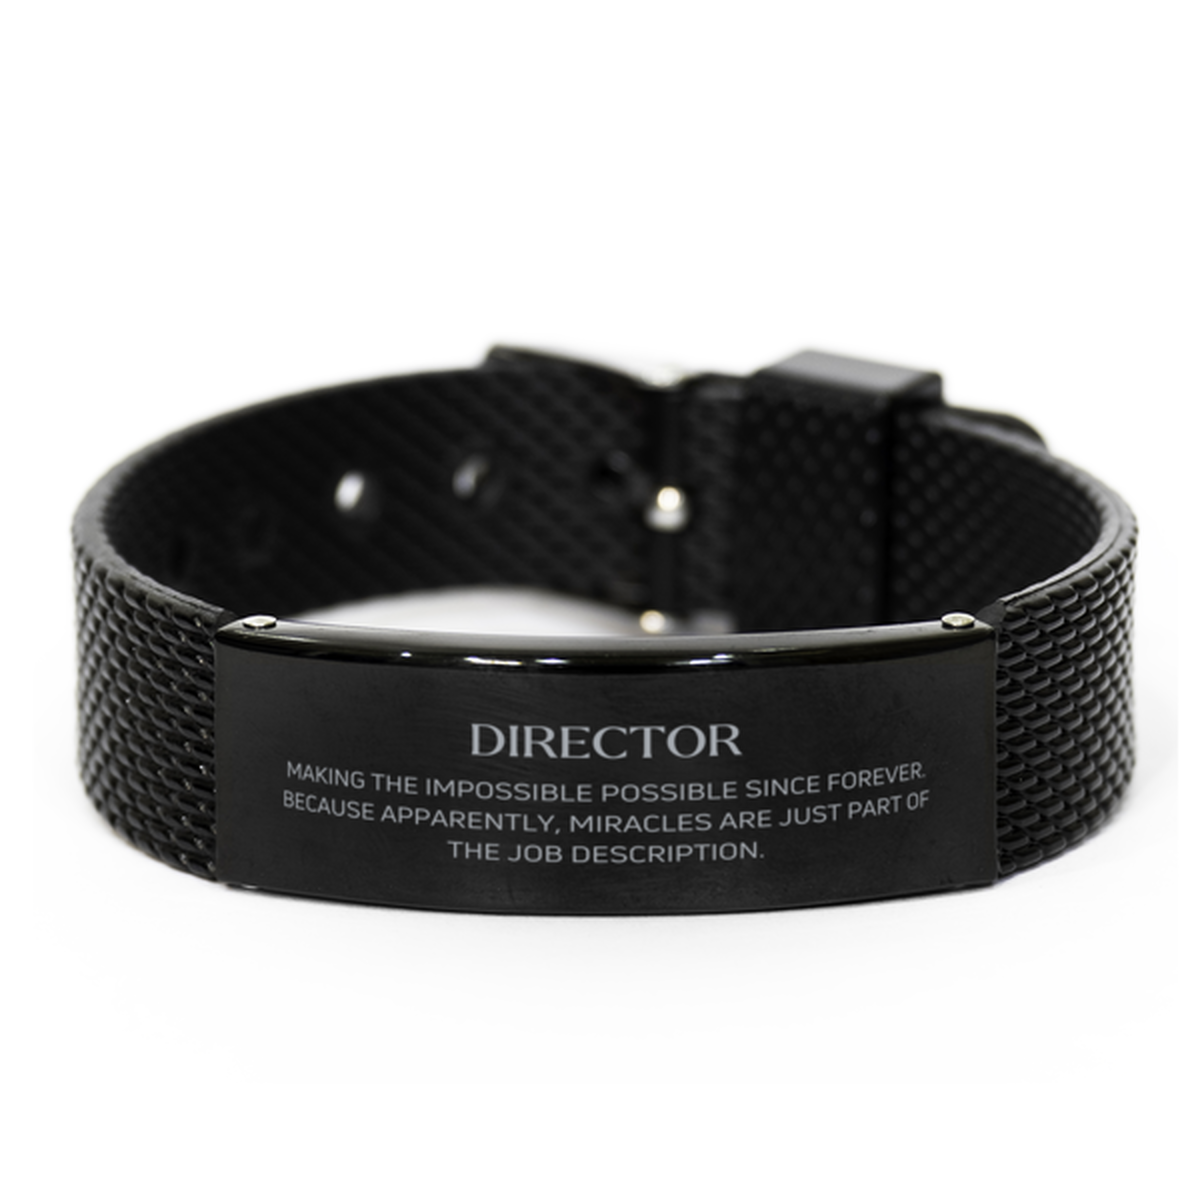 Funny Director Gifts, Miracles are just part of the job description, Inspirational Birthday Black Shark Mesh Bracelet For Director, Men, Women, Coworkers, Friends, Boss